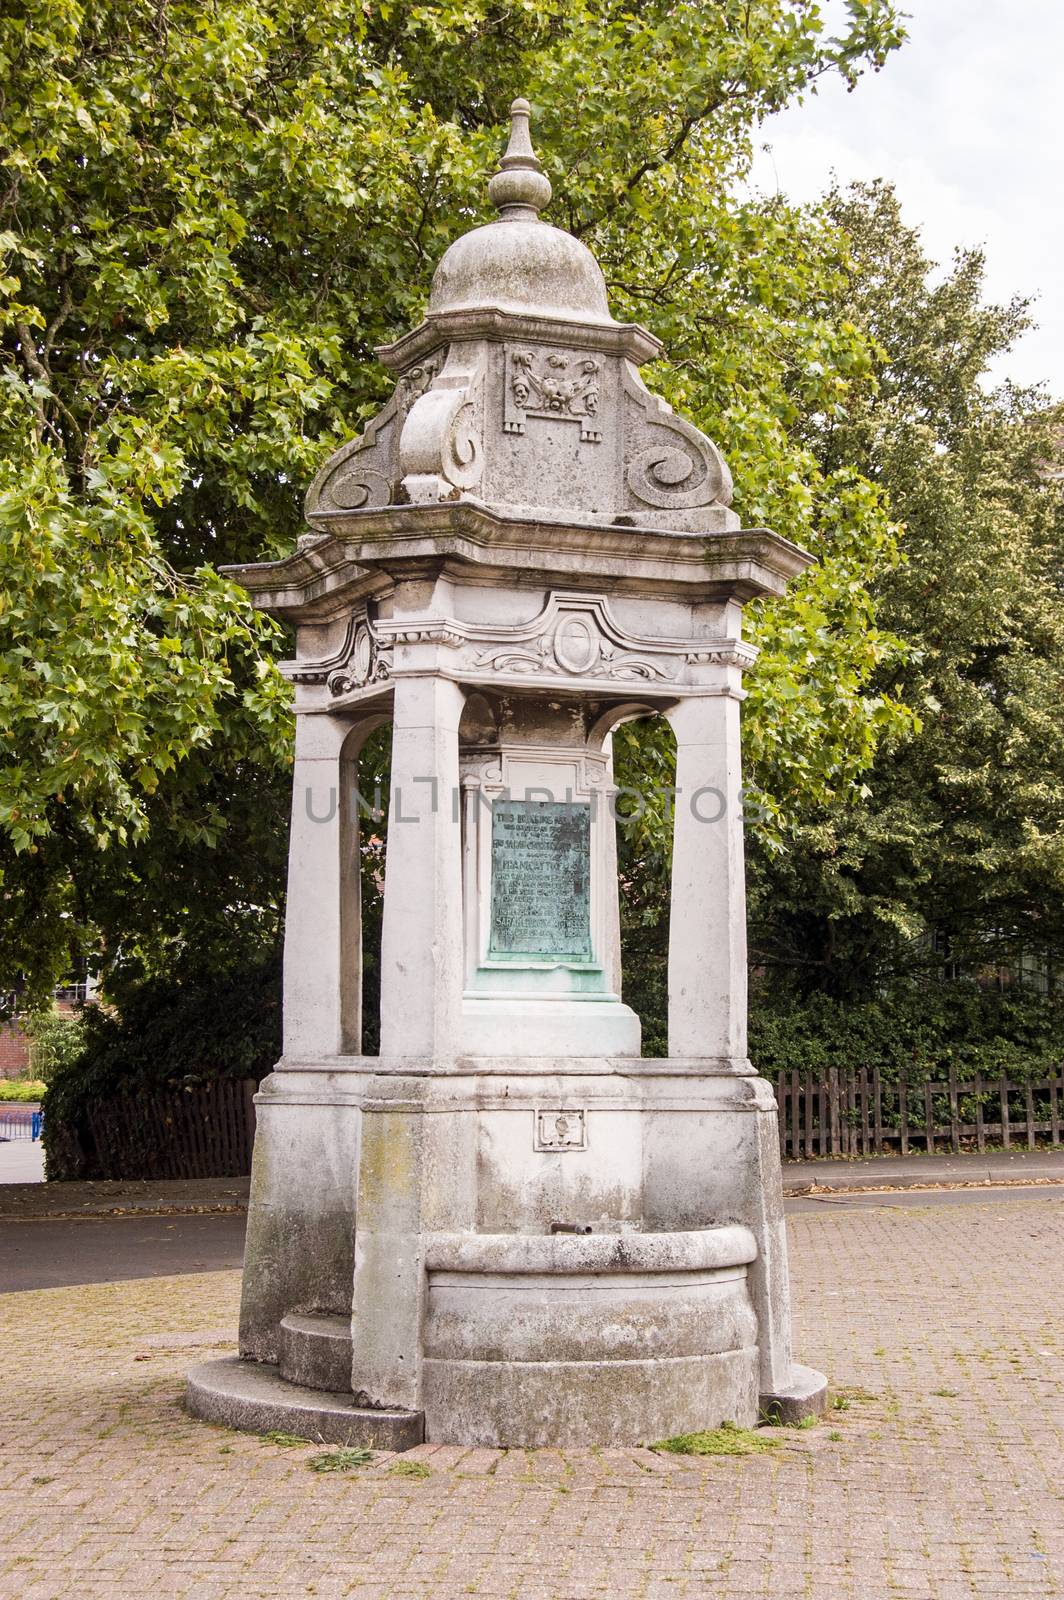 Drinking fountain monument, Reading by BasPhoto